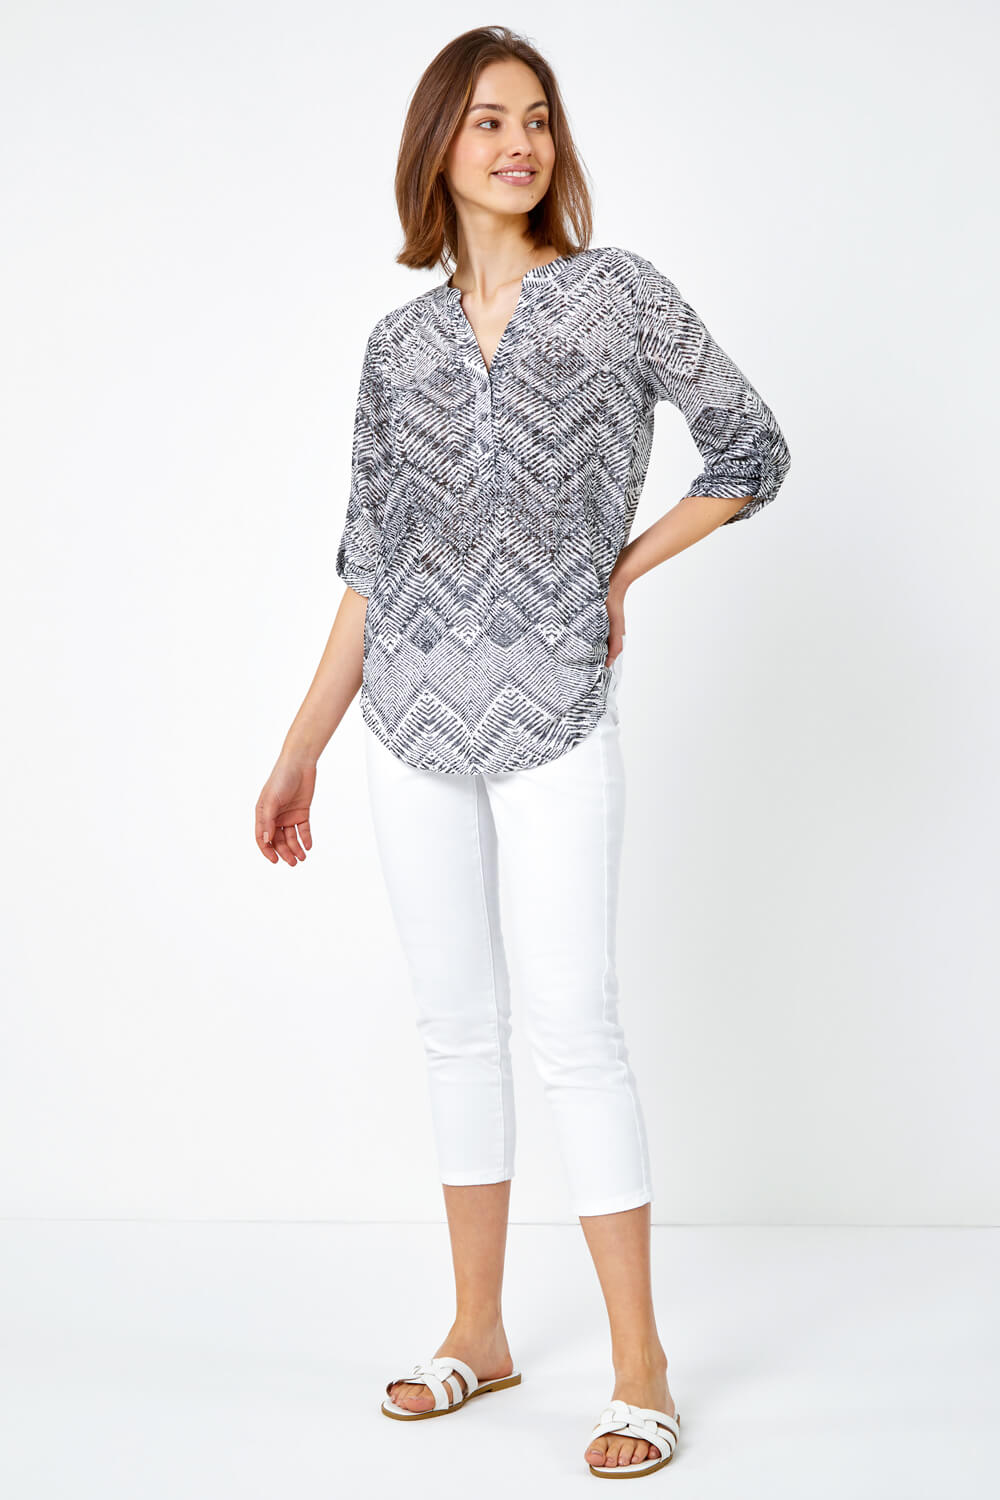 Black Textured Aztec Print Relaxed Shirt, Image 2 of 5